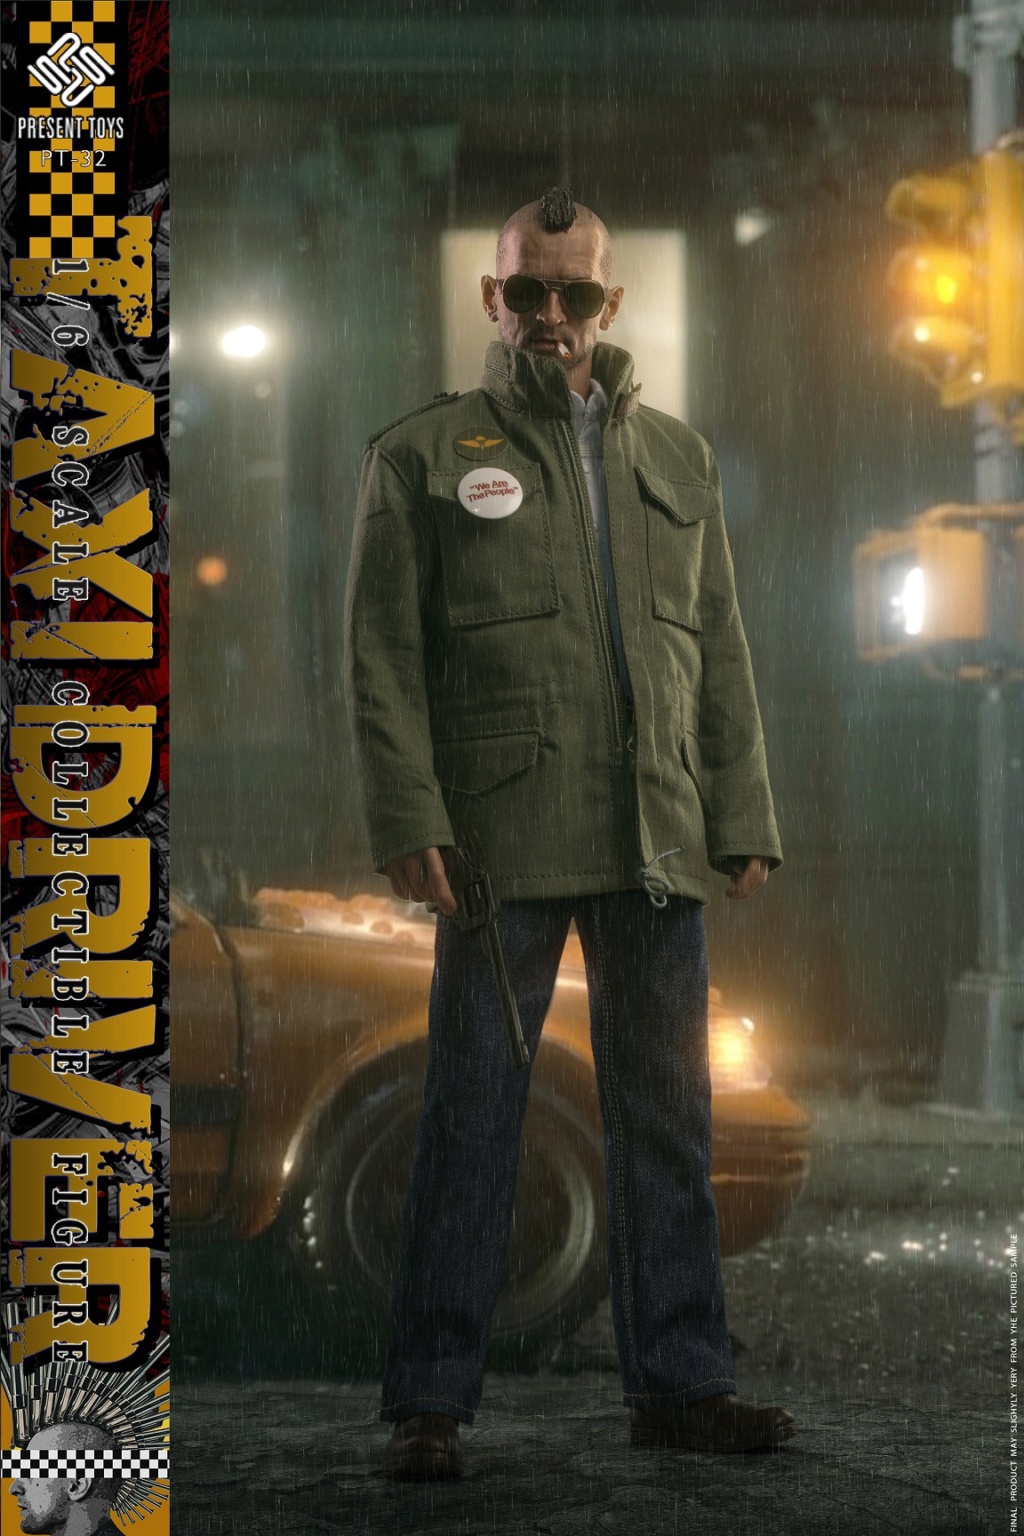 movie-based - NEW PRODUCT: Present Toys: 1/6 "Taxi Driver" Collection Doll#PT-sp32 18193110